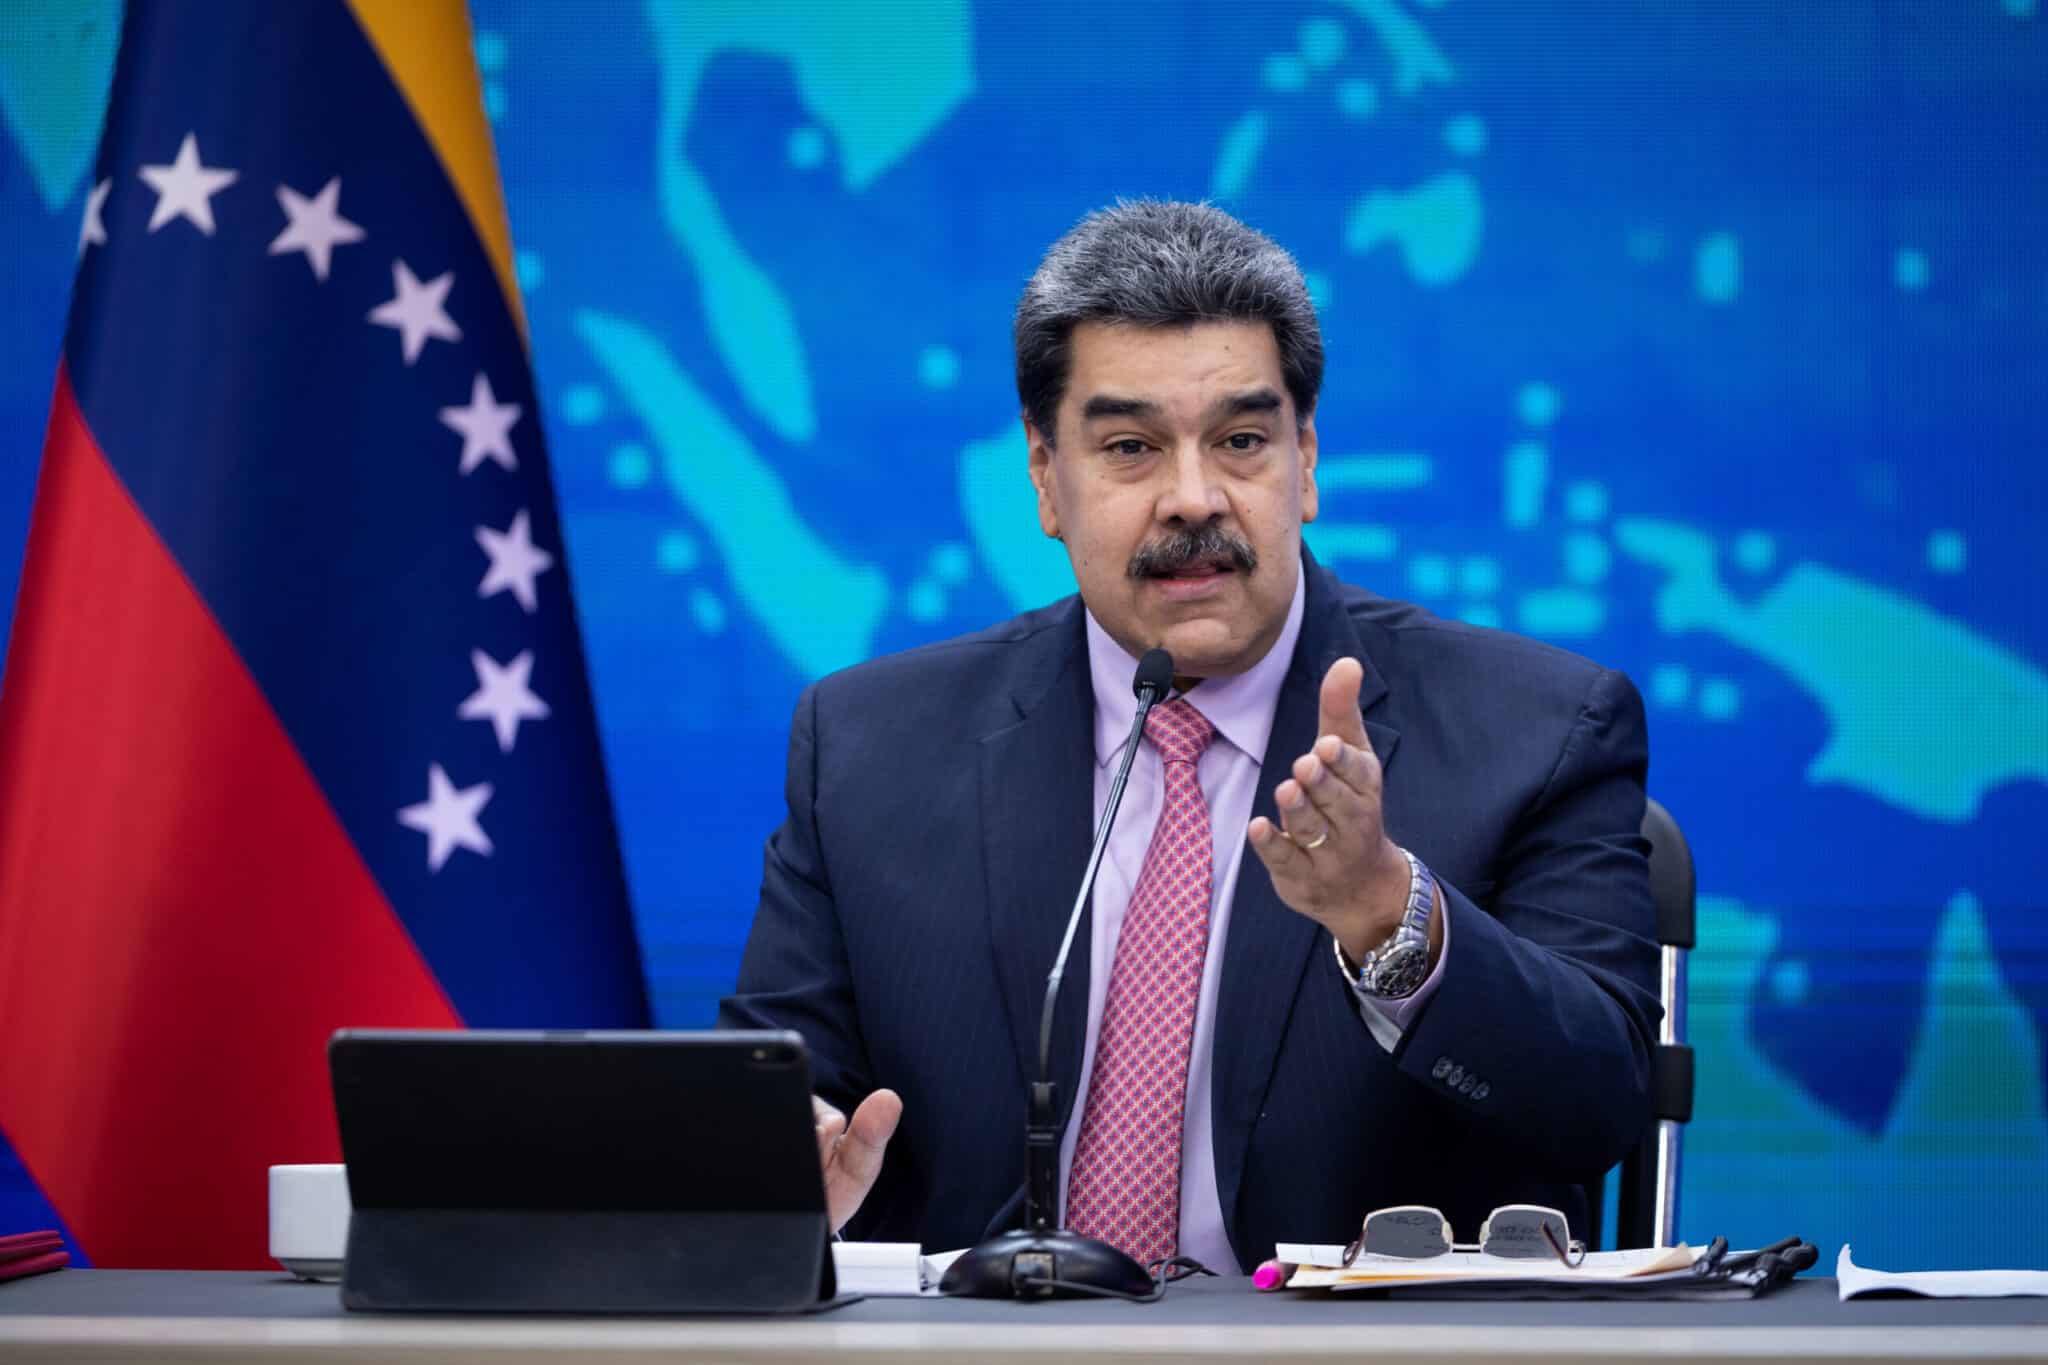 President Nicolás Maduro speaking at a press conference at the end of 2022. File photo.